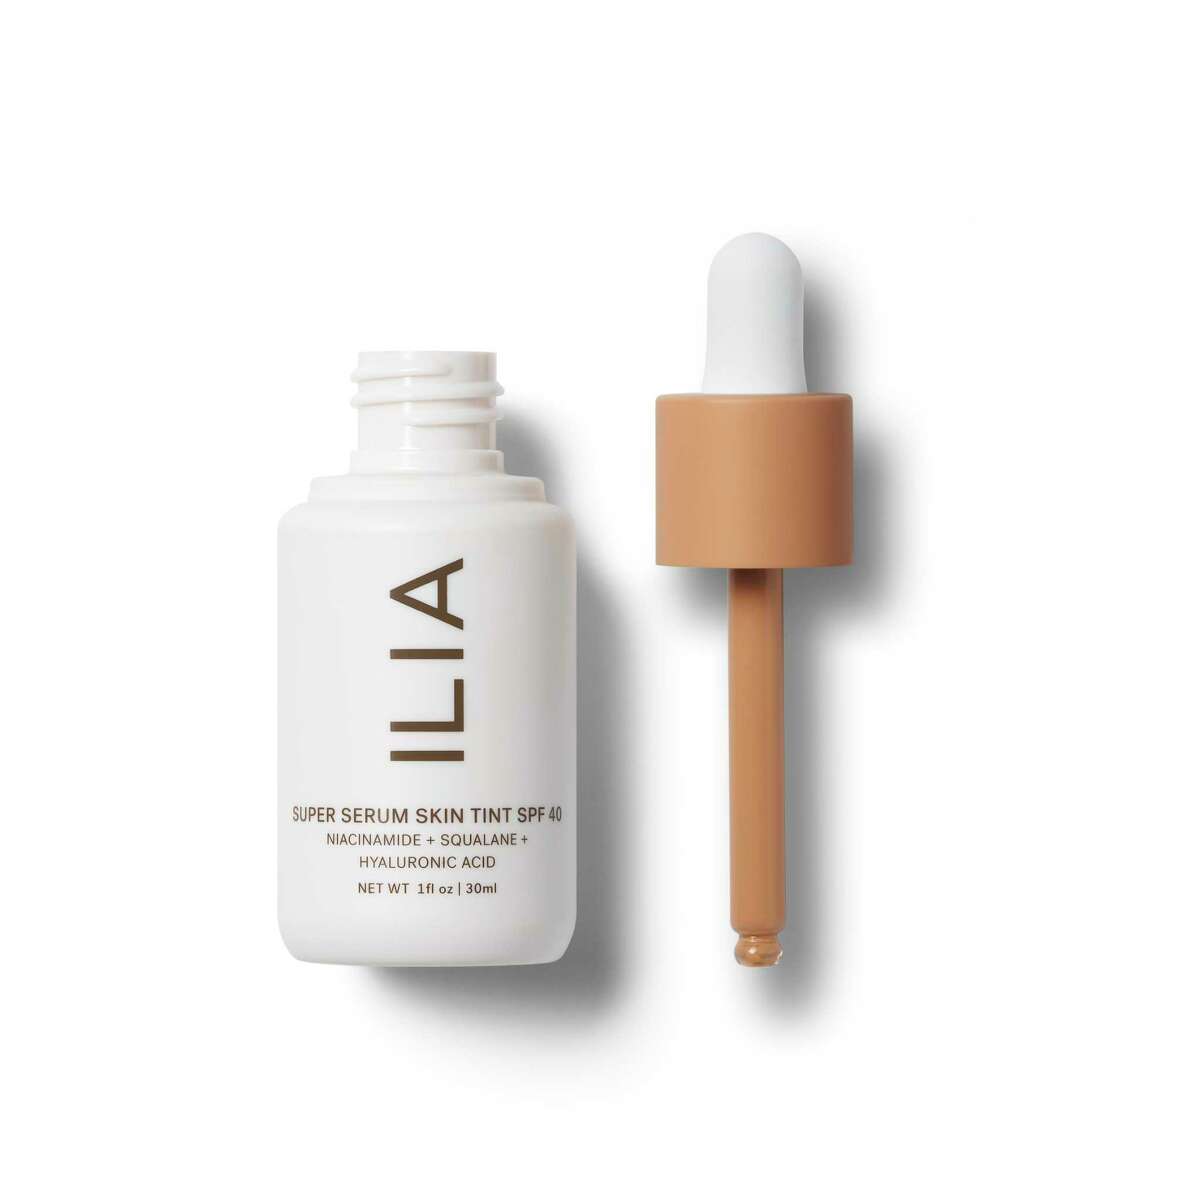 Ilia Super Serum Skin Tint SPF 40: With 18 shades, this weightless SPF serum employs hyaluronic acids to soften, moisturize and protect skin from UVA, UVB and blue light; $46 at iliabeauty.com, Sephora and Kuhl-Linscomb.